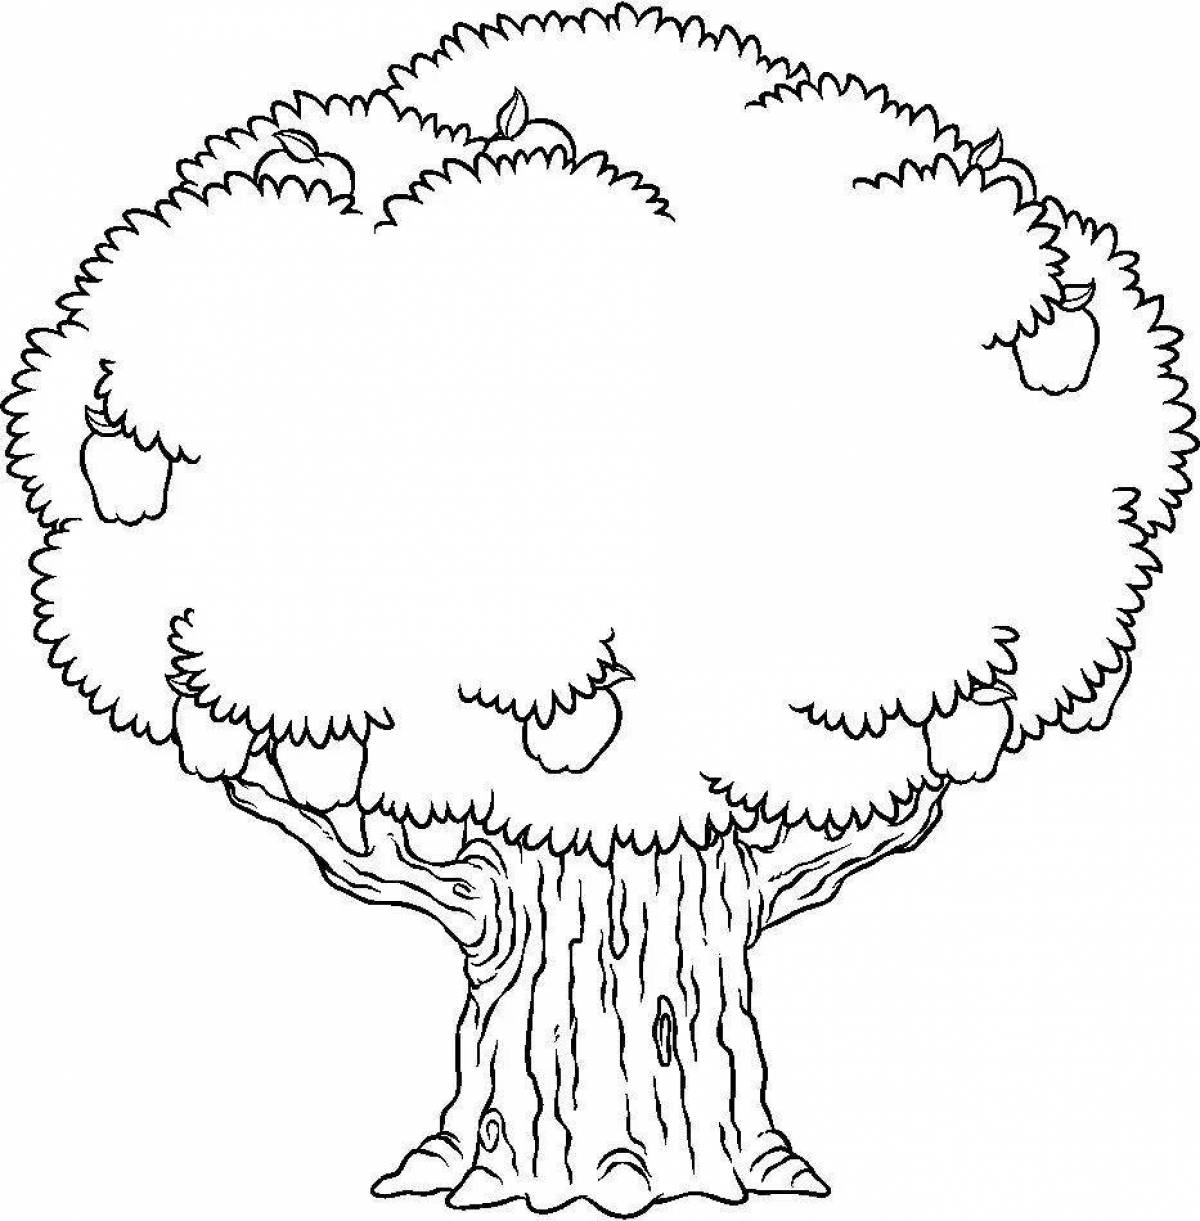 Coloring page jubilant family tree